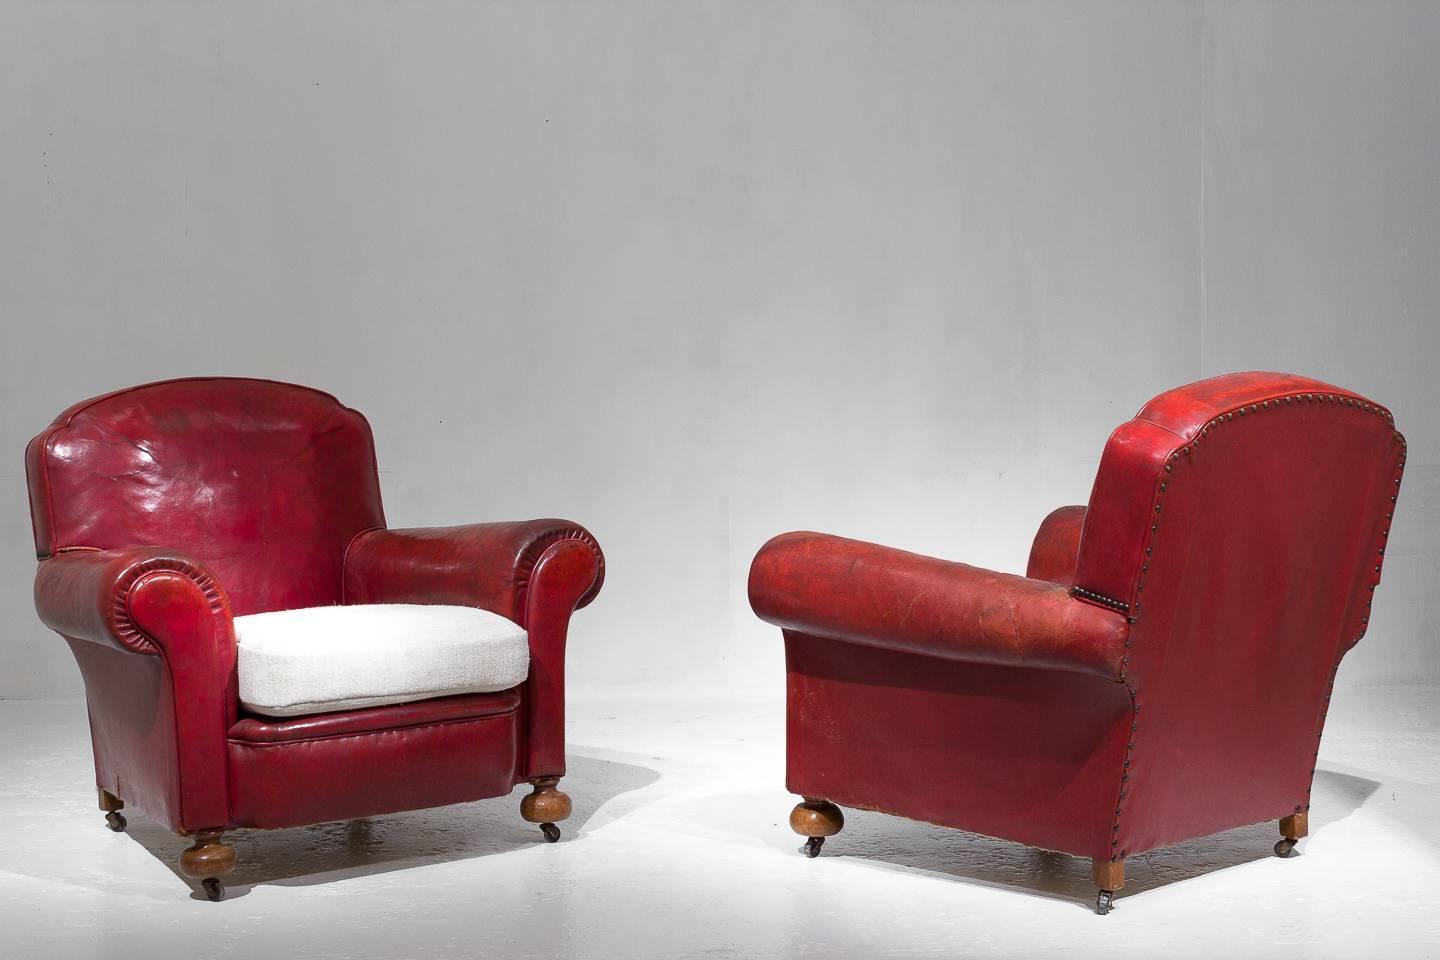 Pair of English club armchairs in original red leather, circa 1910

Measure: Seat height 44 cm.